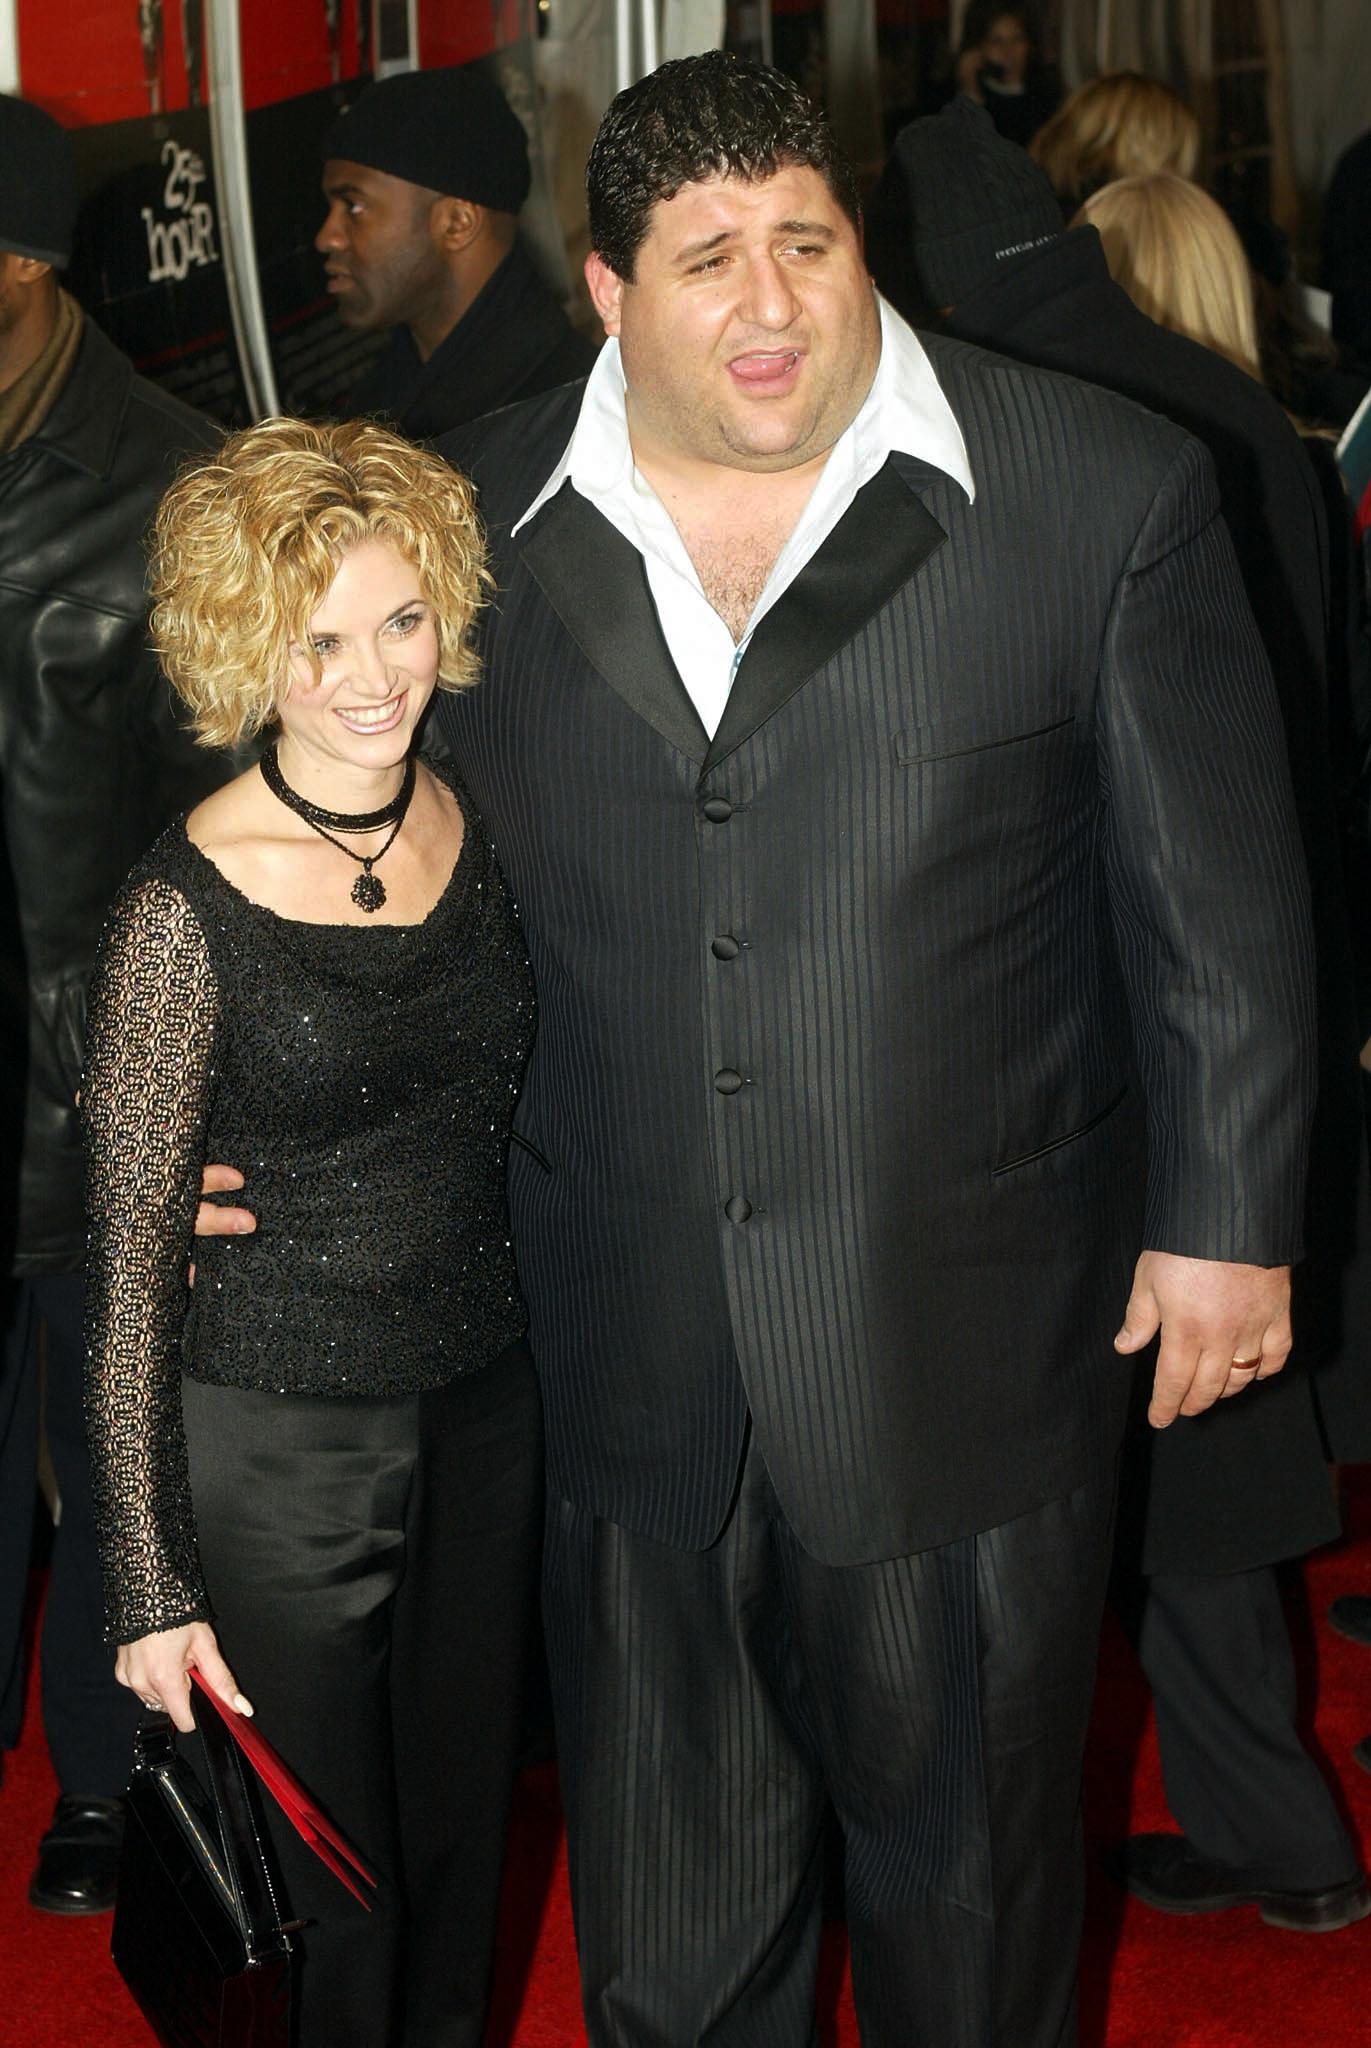 Kathy Giacalone Siragusa and Tony Siragusa arrive at the premiere of the movie "25th Hour" on December 16, 2002, in New York. | Source: Getty Images